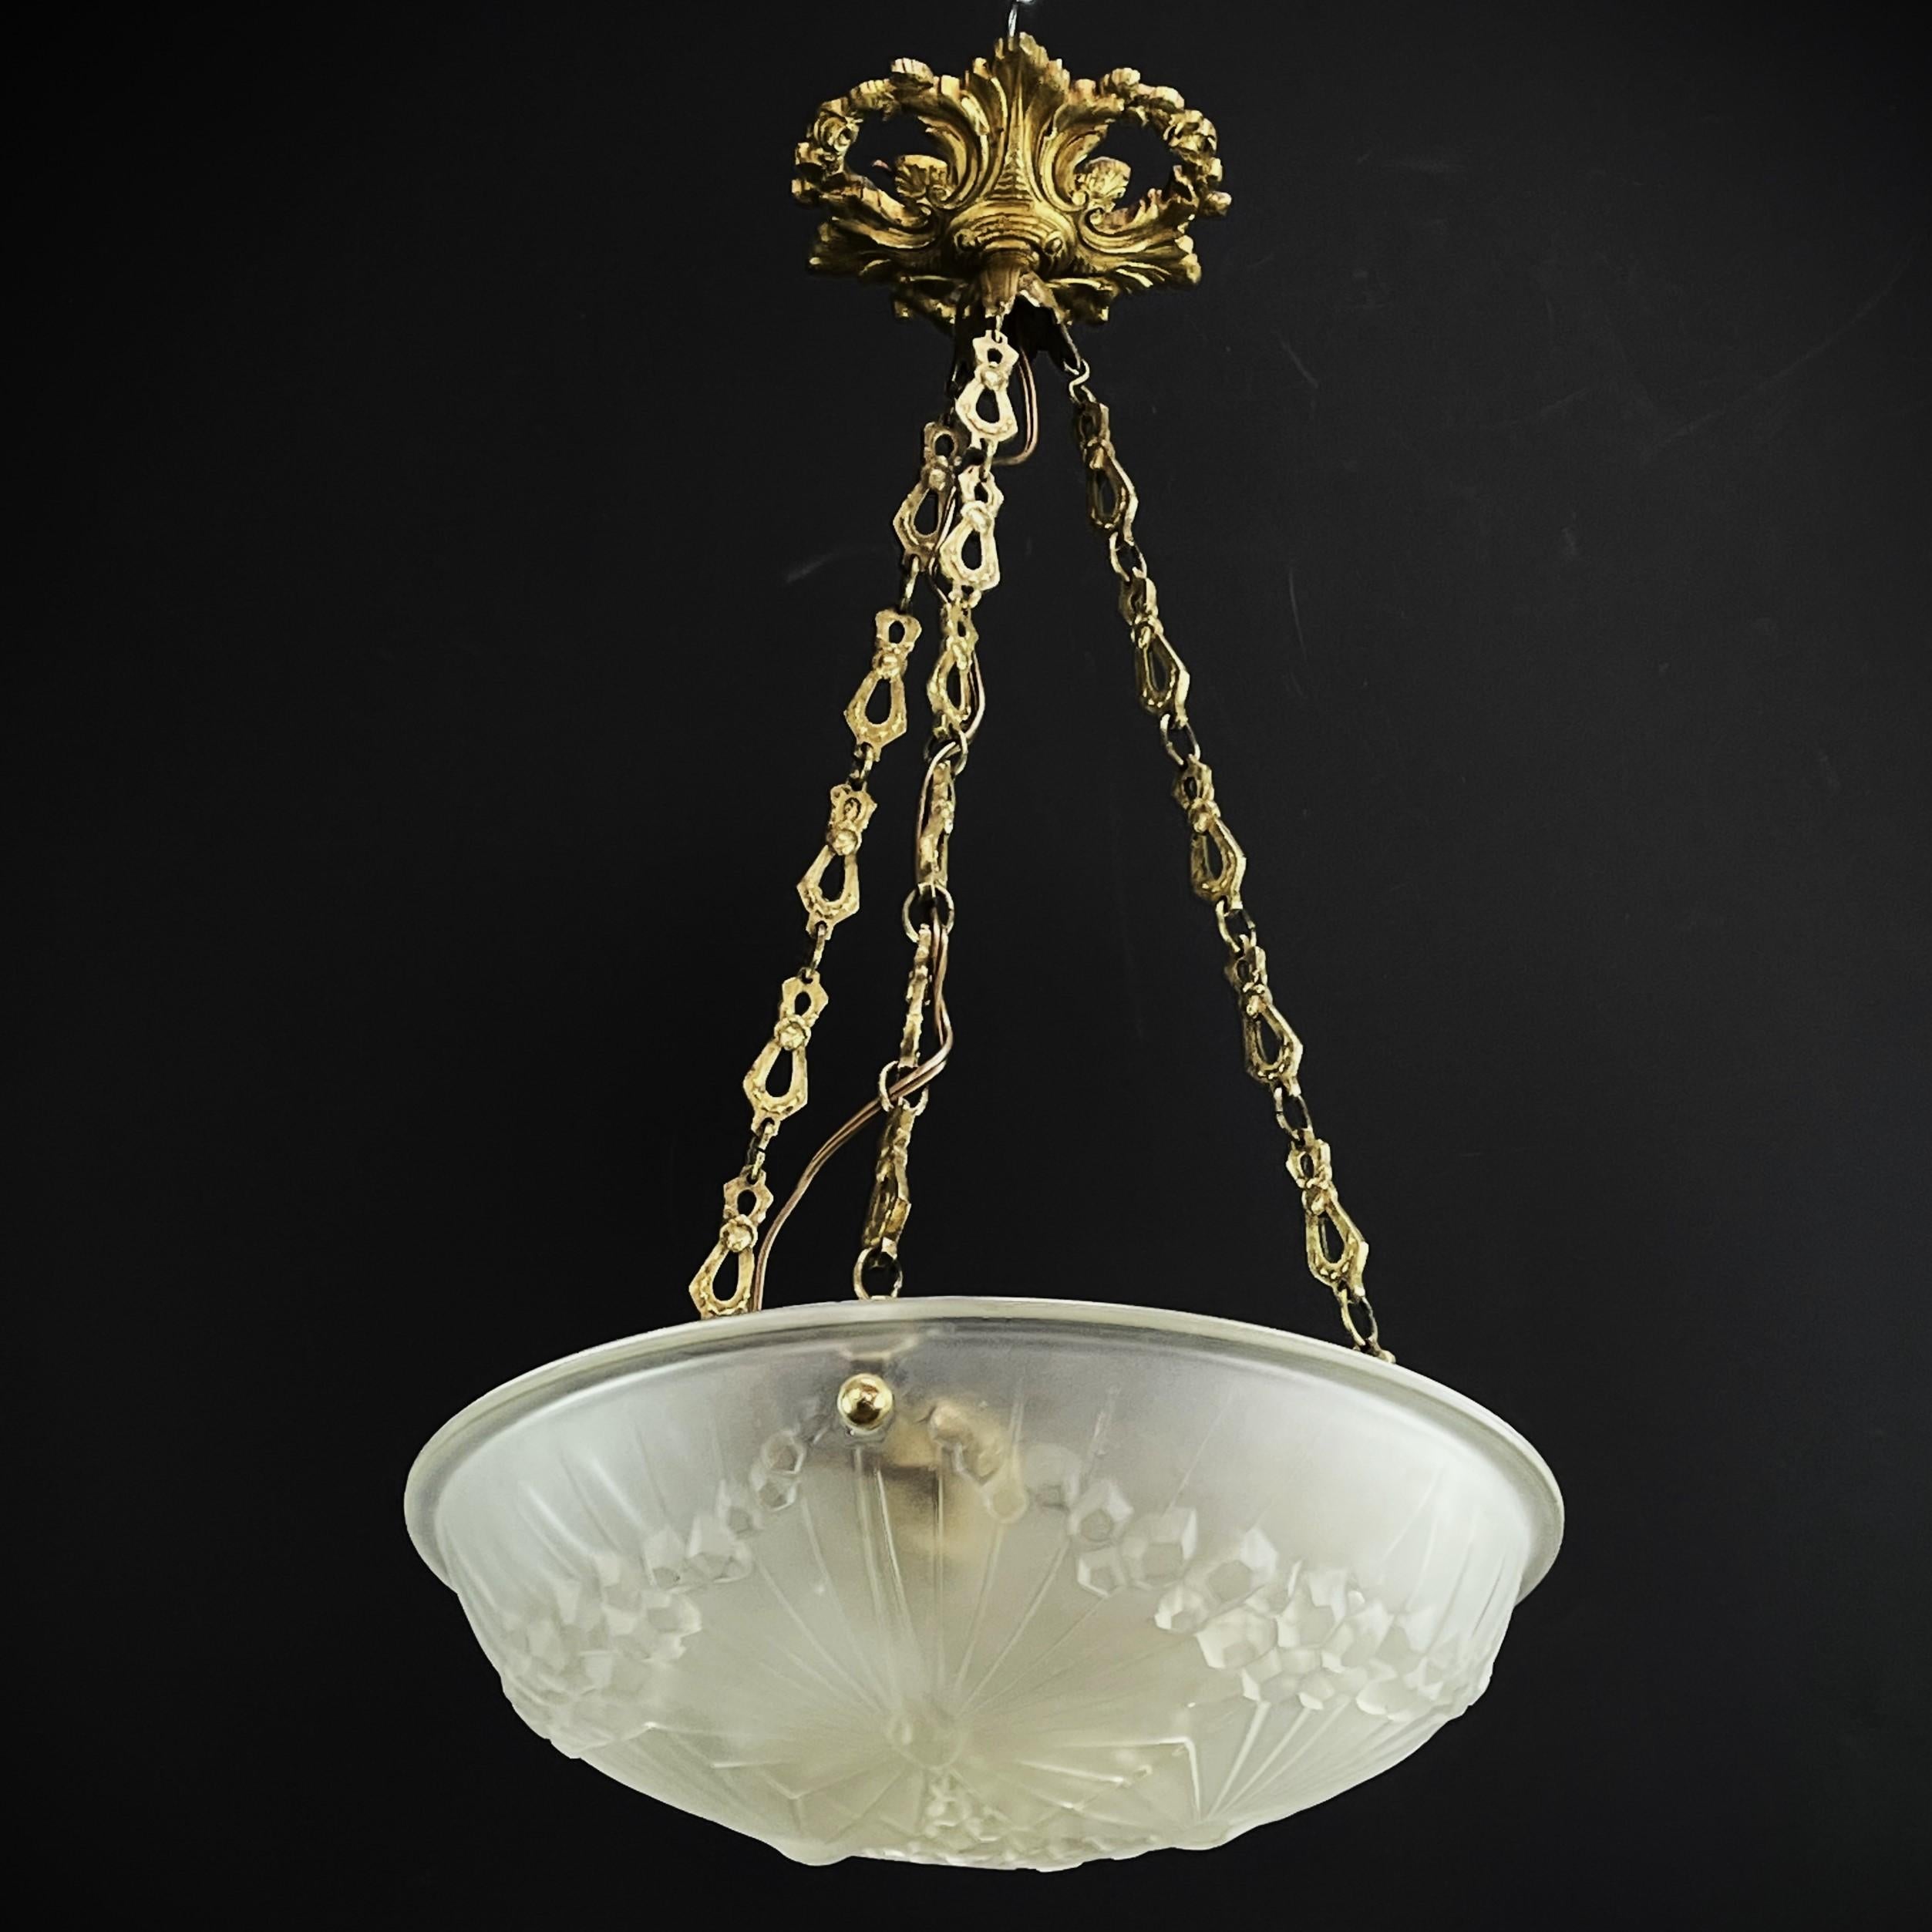 Art Deco lamp by Muller Frères  Lunéville

The ART DECO ceiling lamp is a remarkable example of early 20th century craftsmanship and style. 

The ART DECO ceiling lamp is a remarkable example of the craftsmanship and style of the early 20th